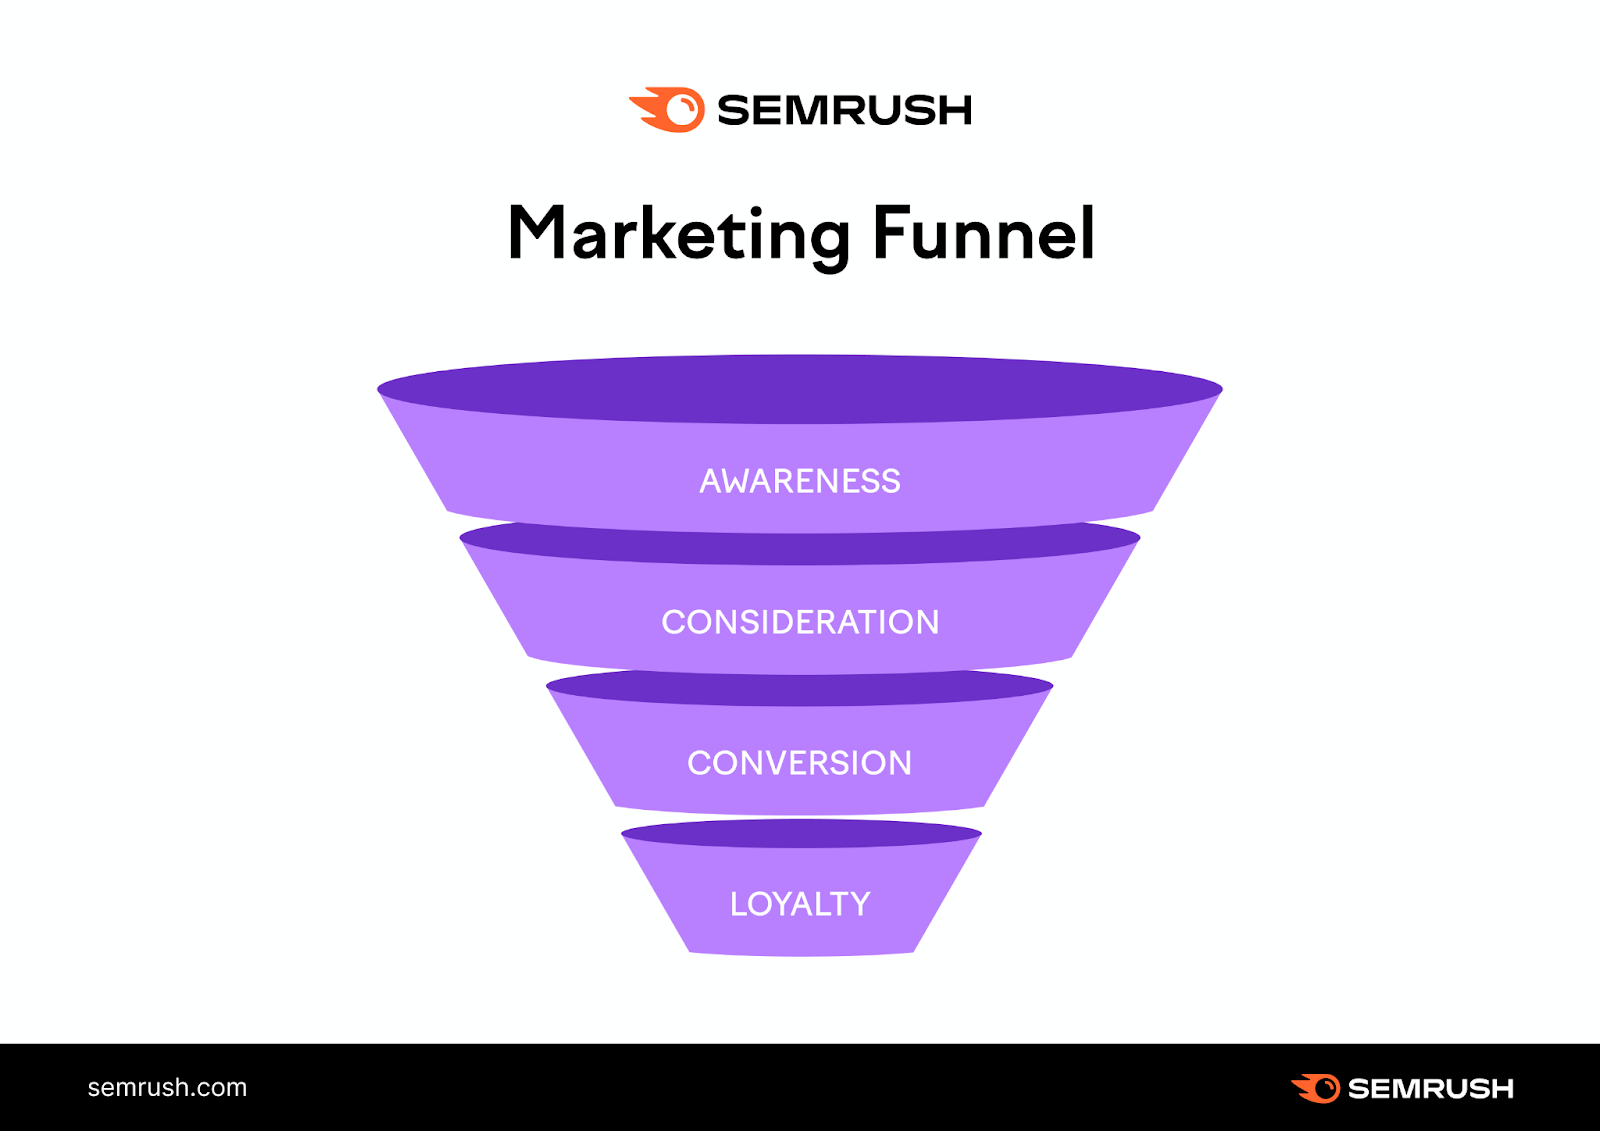 An image of a marketing funnel